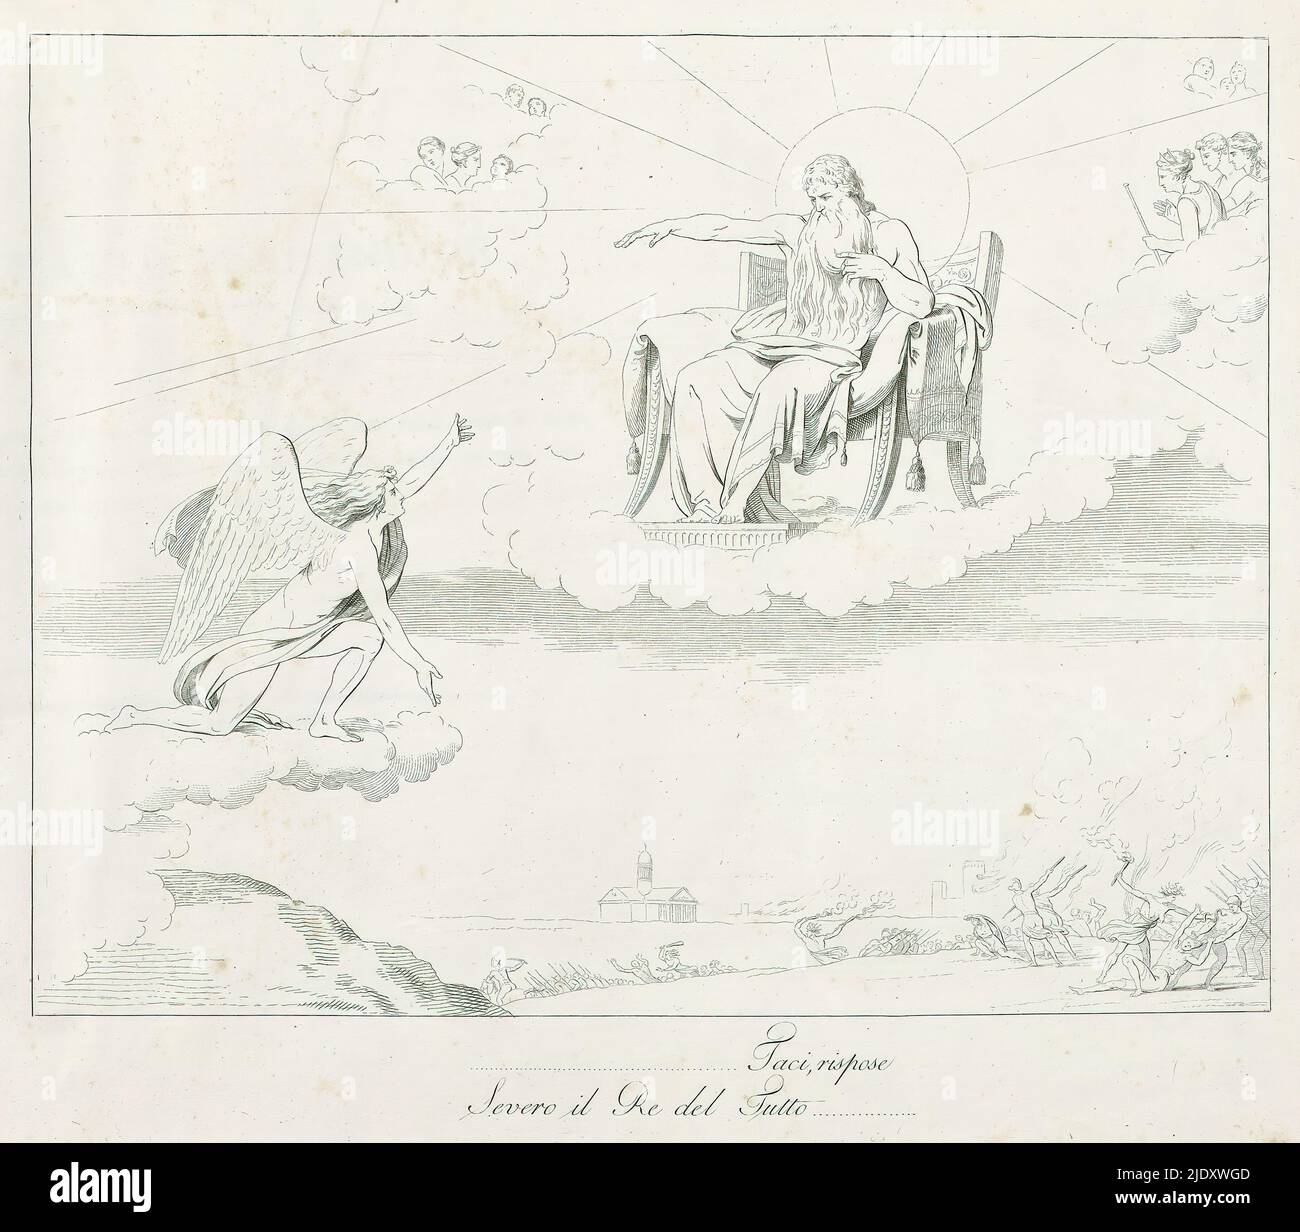 Angel kneeling before God the Father on his throne, (...) Taci, rispose Severo il re del tutto (...) (title on object), Illustrations to the poem Pronea by Melchiore Cesarotti, an apology for Napoleon Bonaparte (series title), La pronea del Cesarotti delineata ed incisa dal Matteini (series title), Below the representation a verse in Italian. Print is part of an album., print maker: Teodoro Matteini, publisher: anonymous, print maker: Italy, publisher: Milaan, 1808, paper, etching, height 332 mm × width 382 mm Stock Photo